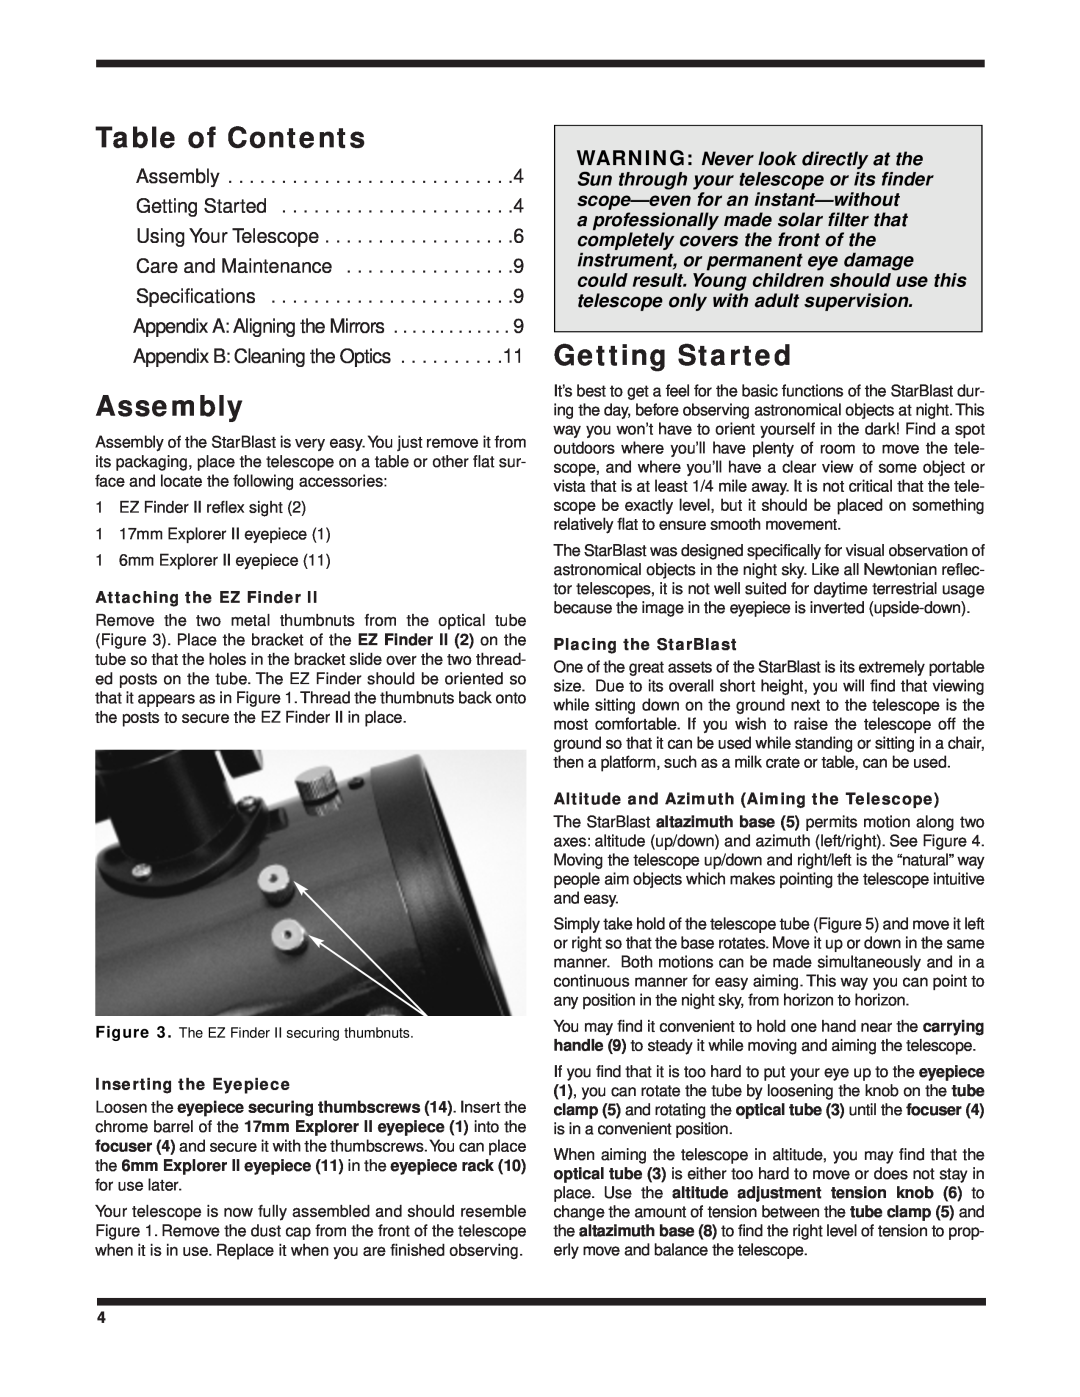 Orion 9814 instruction manual Table of Contents, Assembly, Getting Started, Specifications, Appendix B Cleaning the Optics 